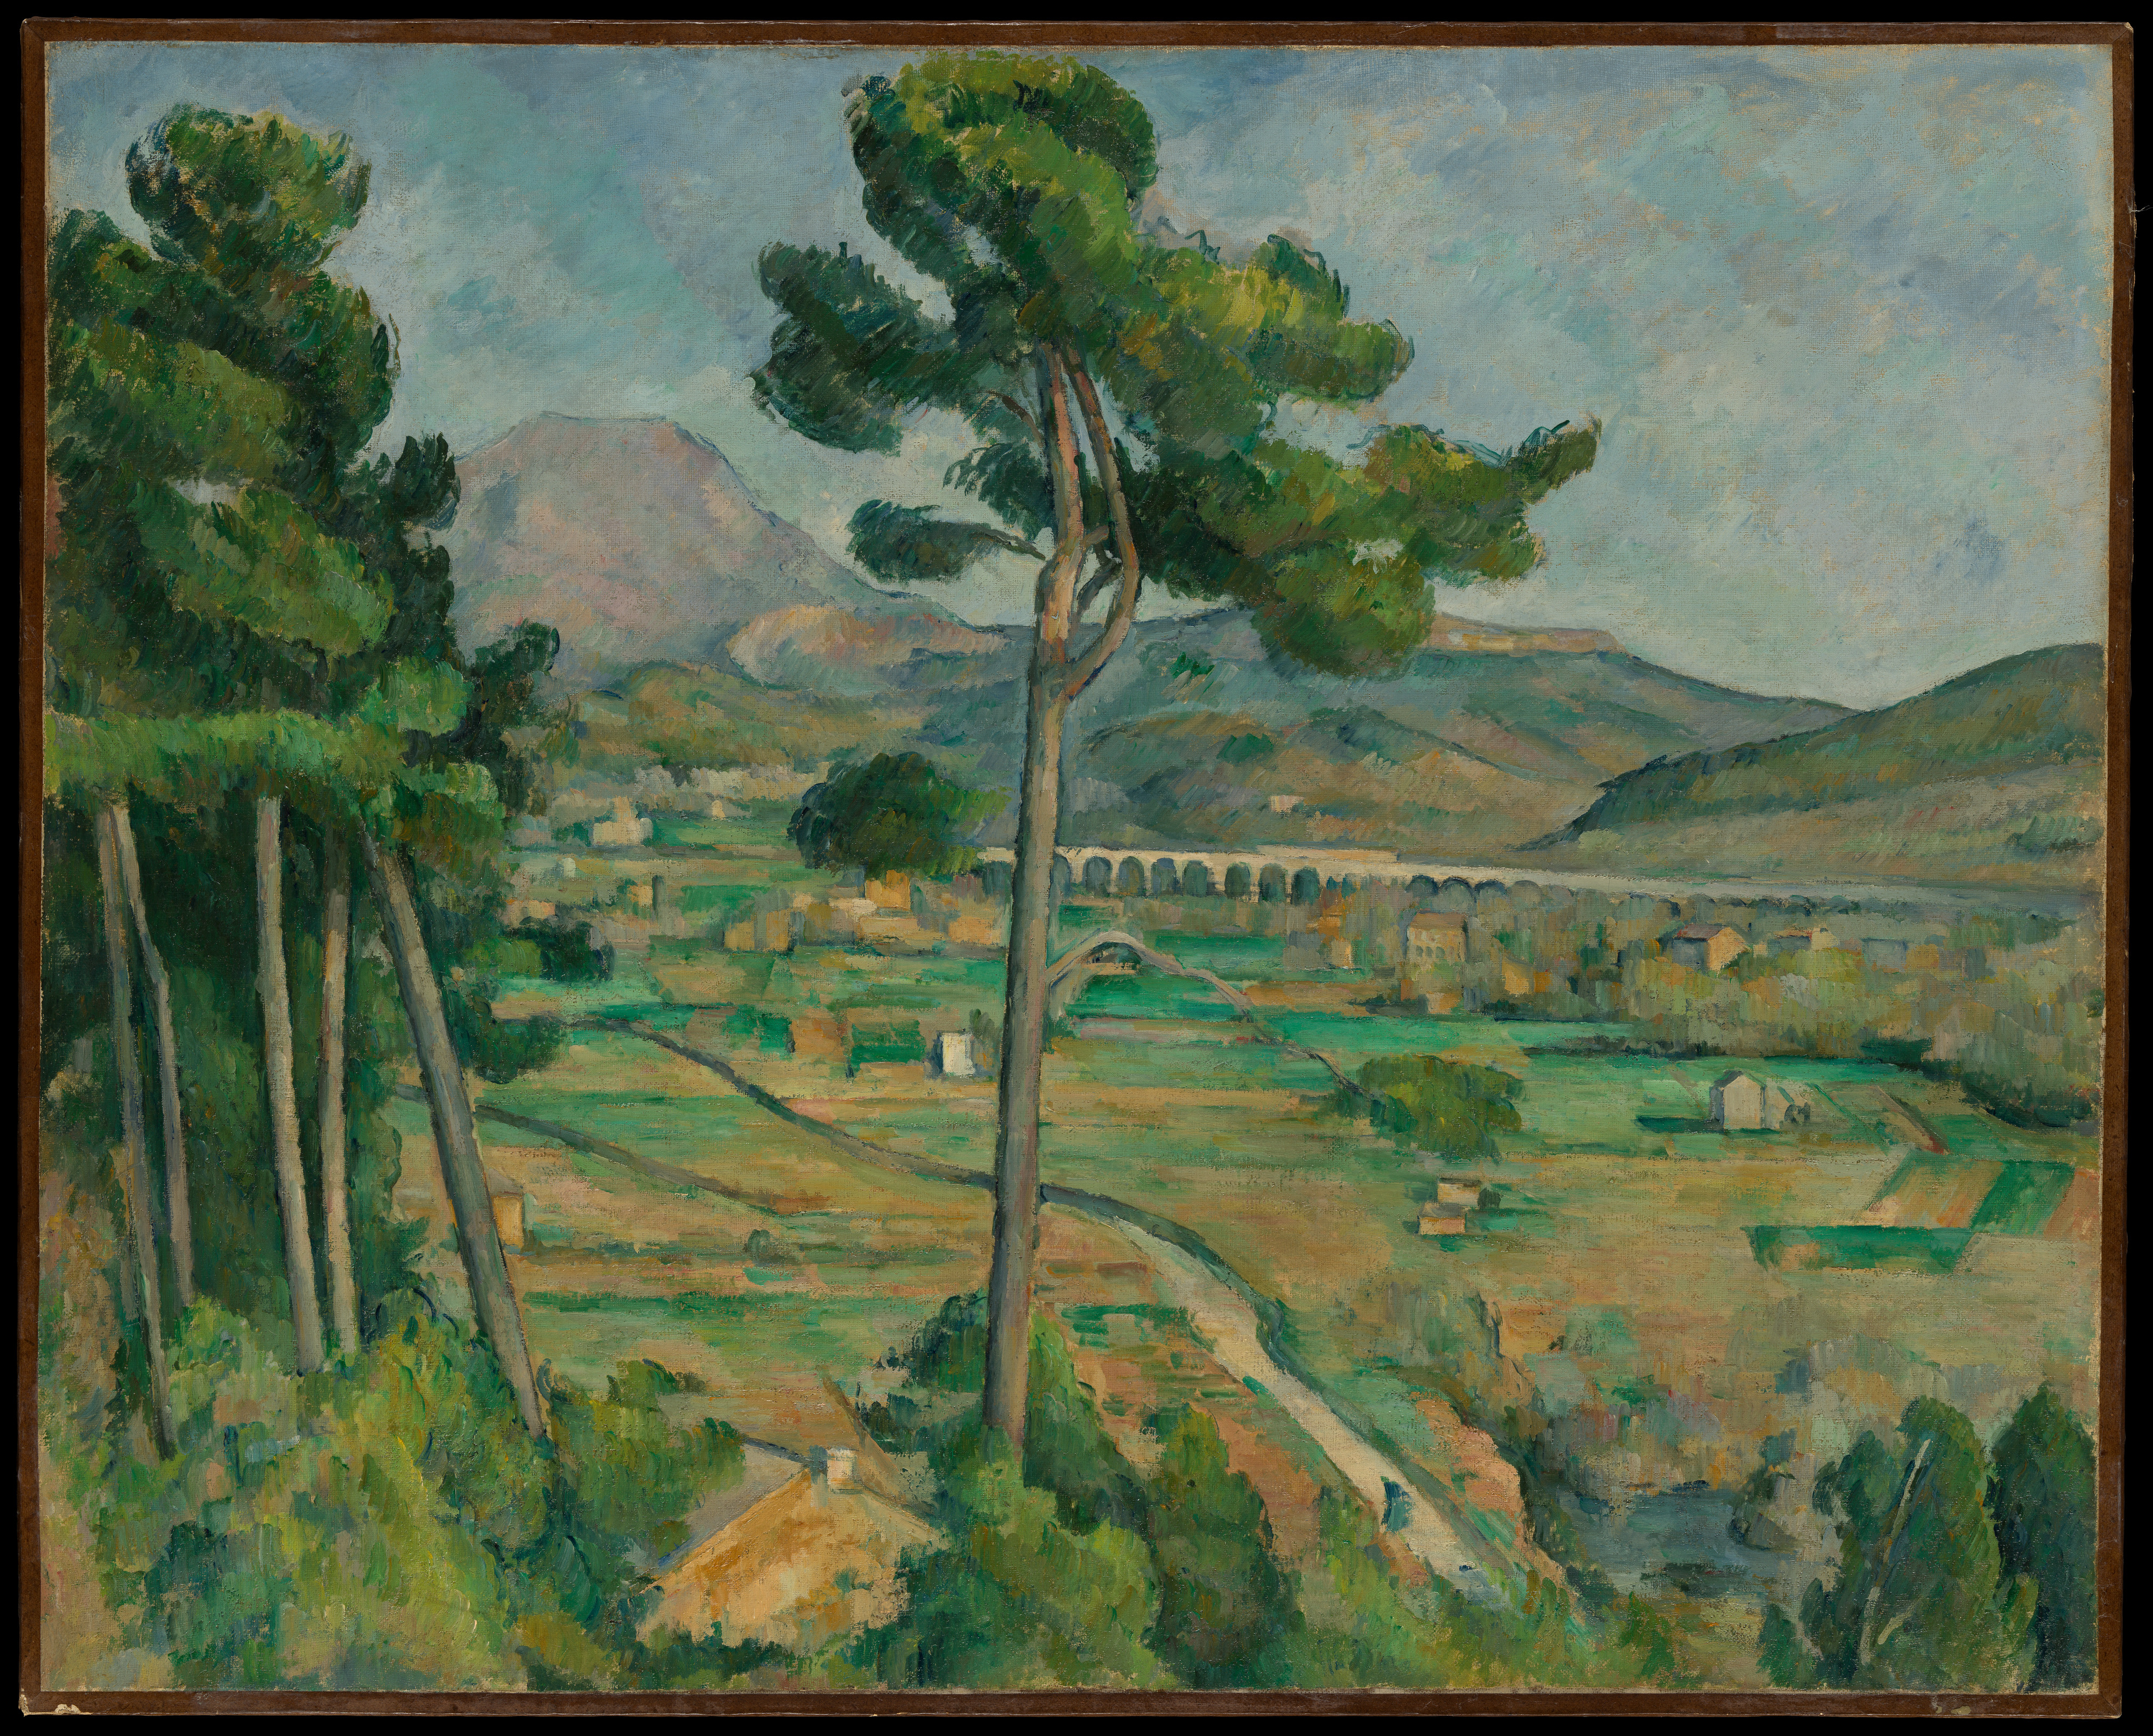 Paul Czanne  Mont Sainte-Victoire and the Viaduct of the Arc River Valley   The Metropolitan Museum of Art